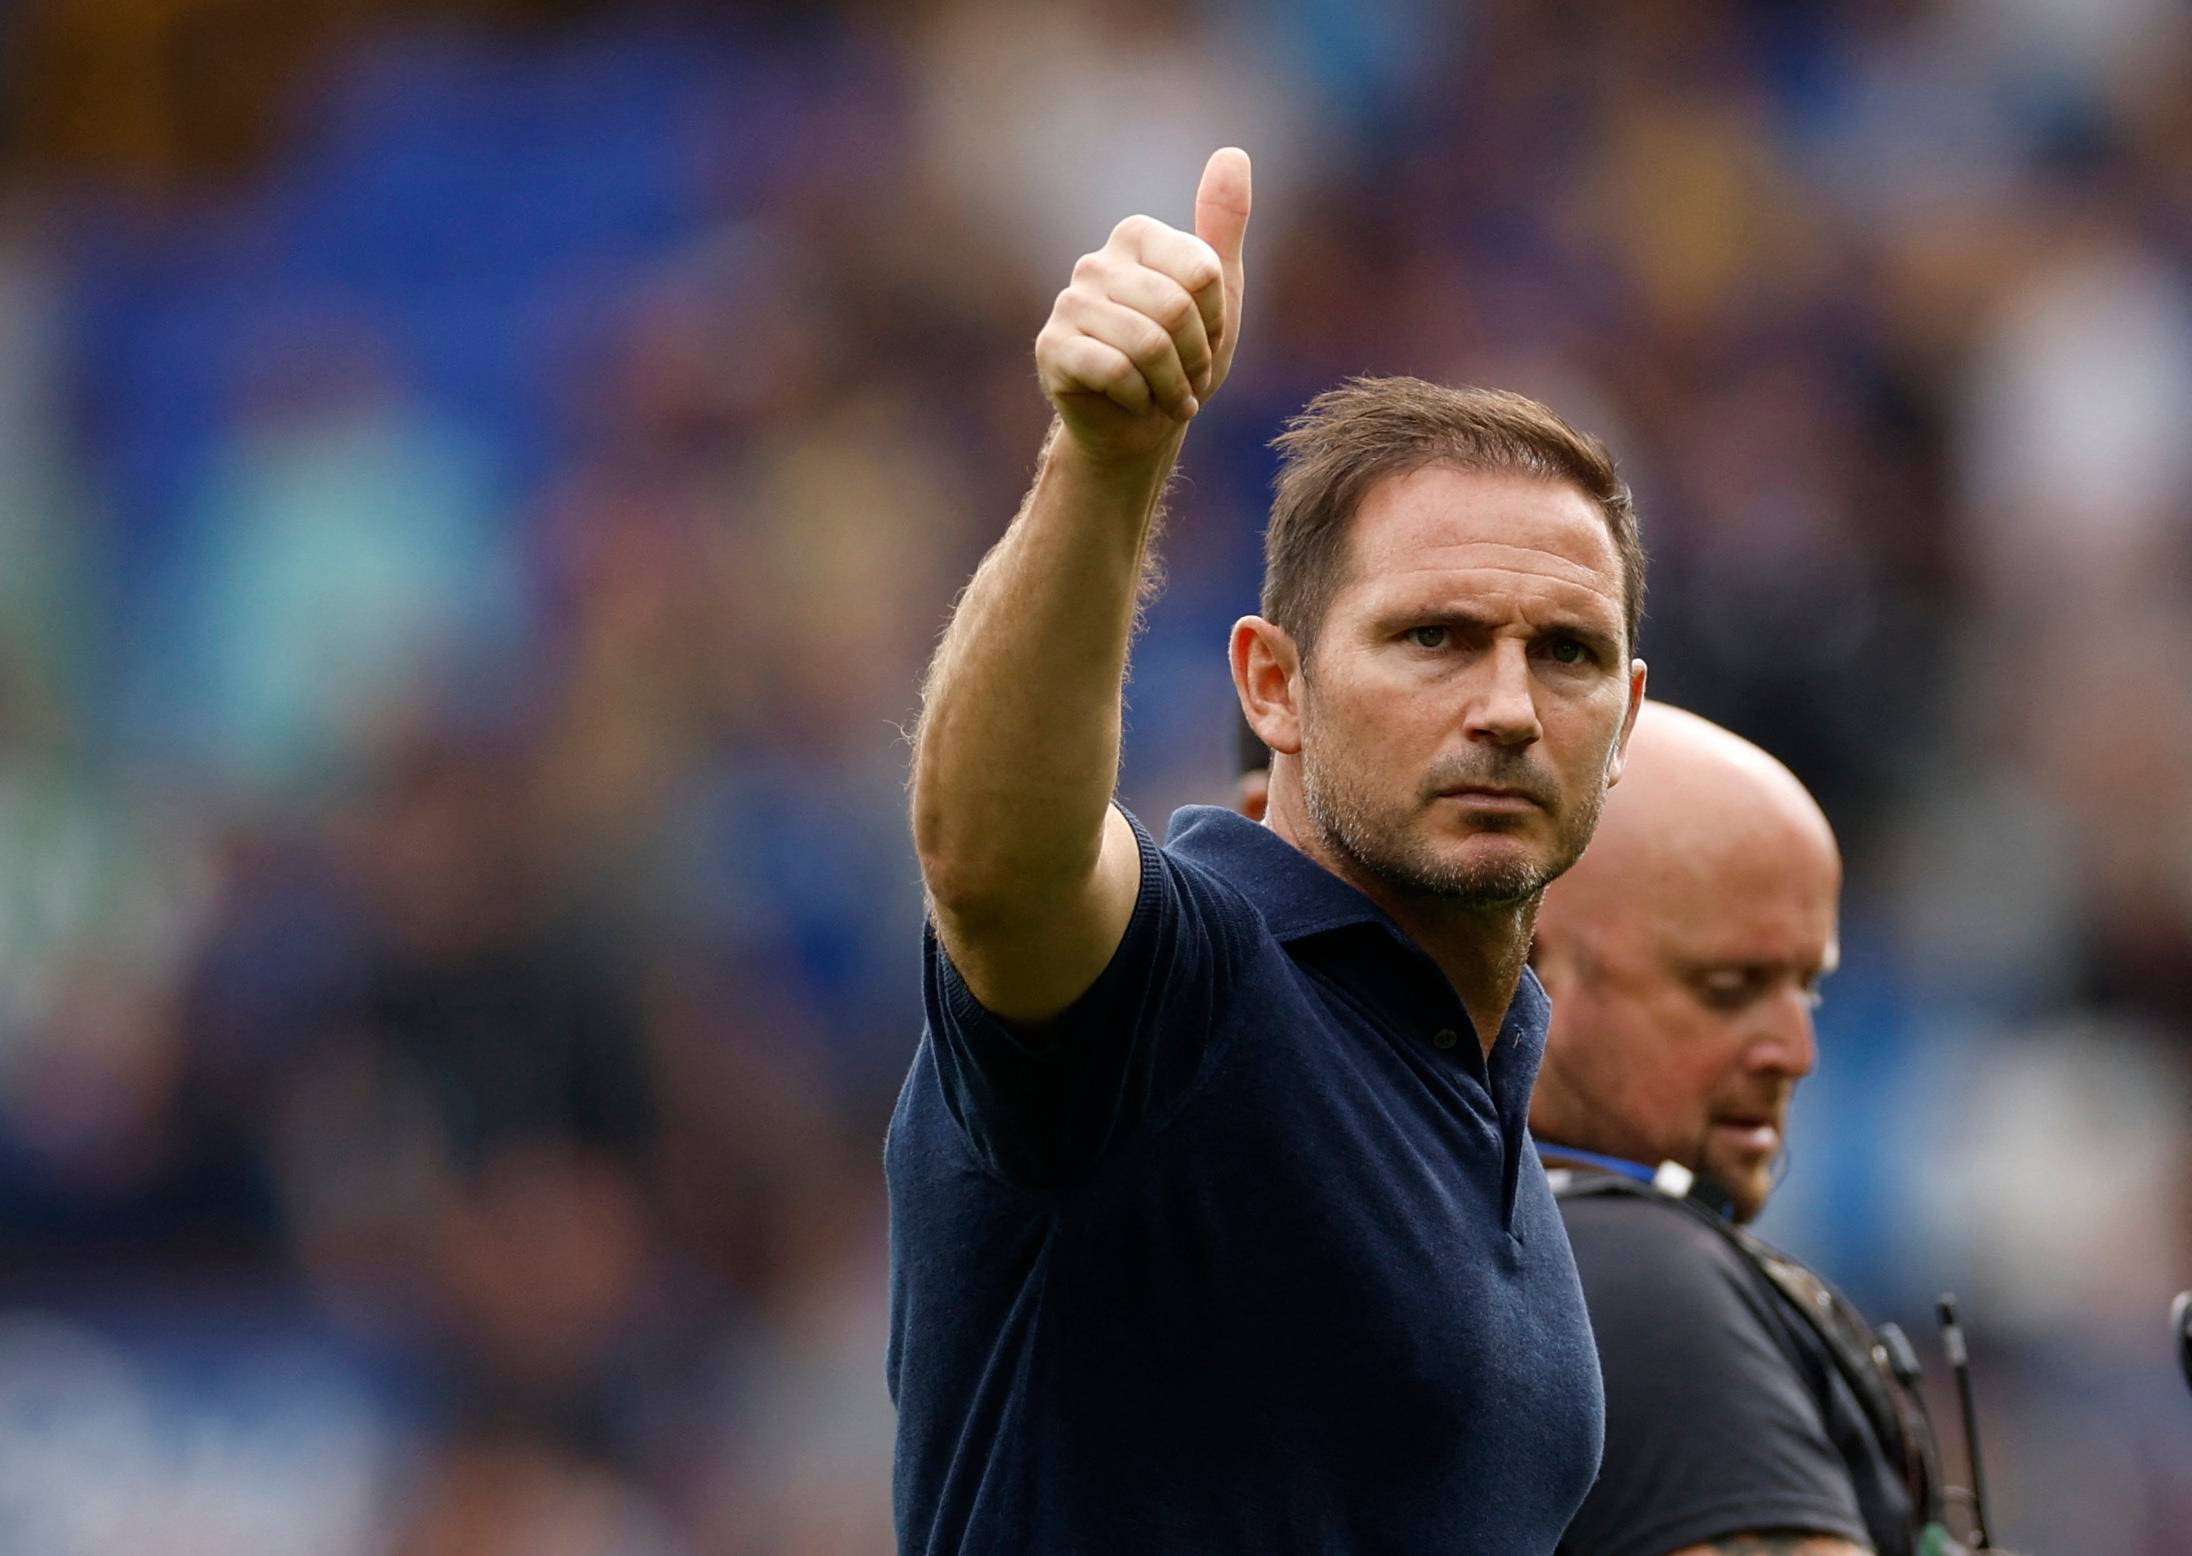 Everton manager Frank Lampard acknowledges fans after the match